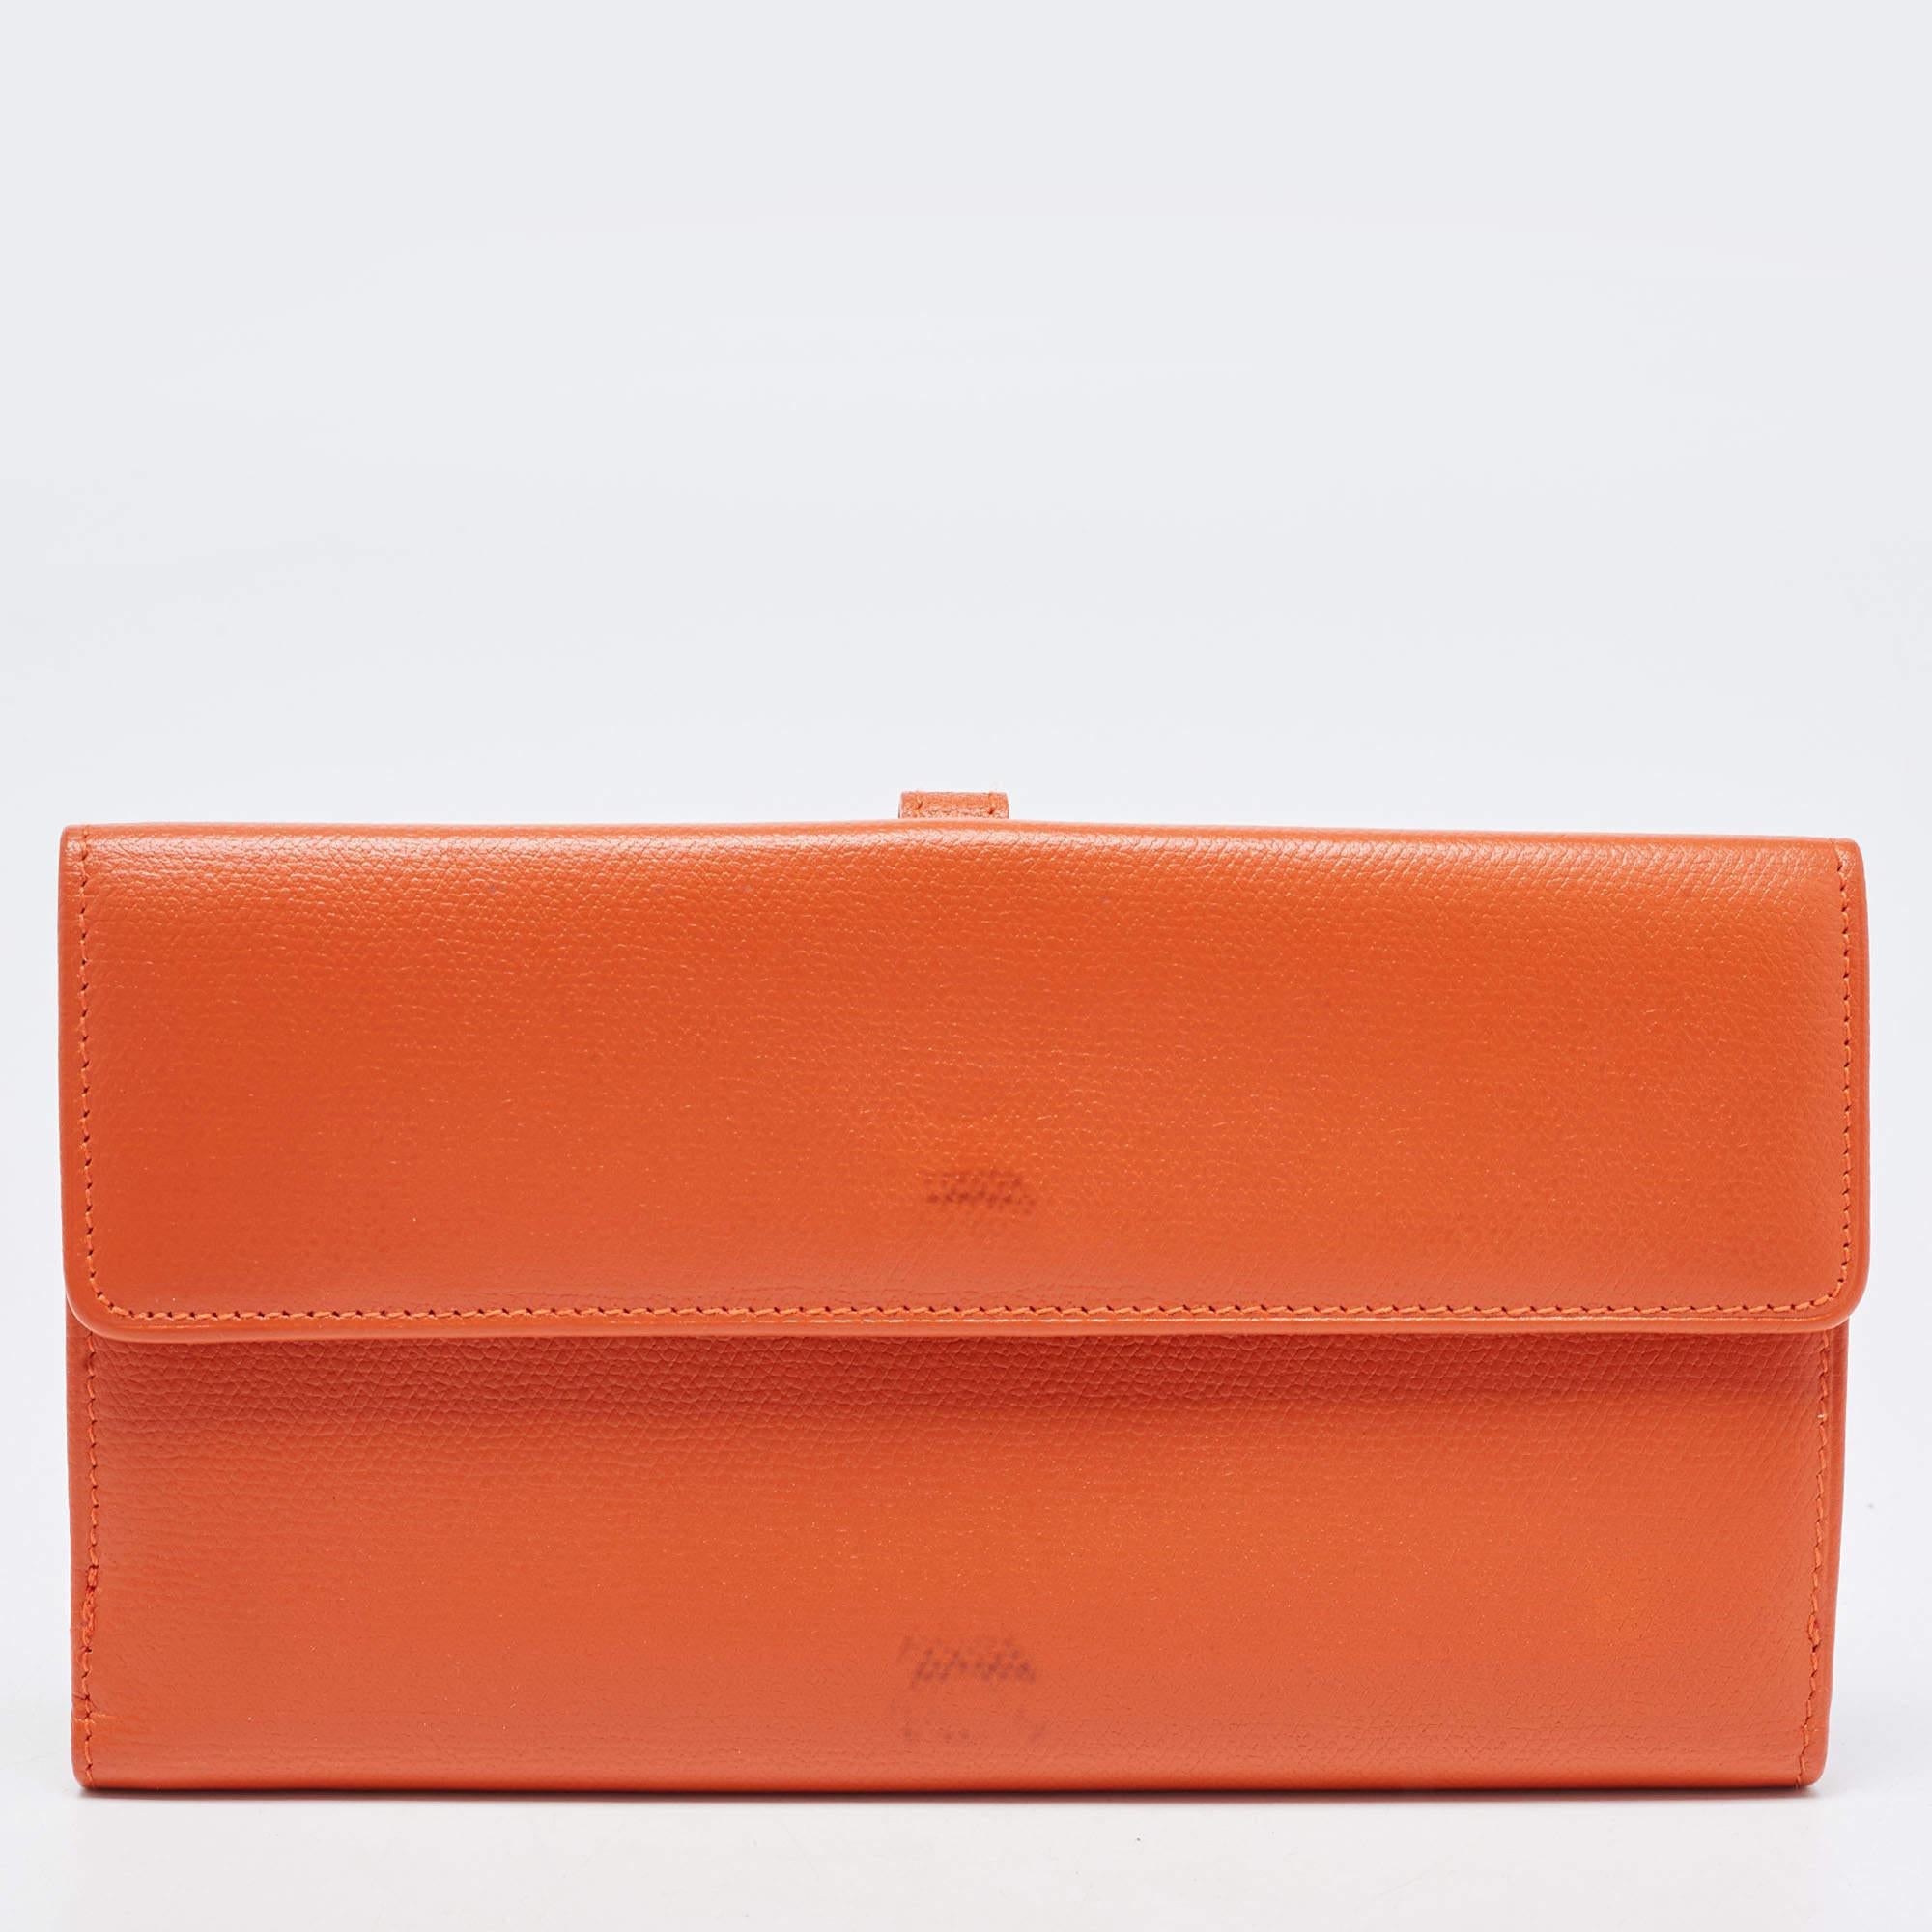 This Chanel long wallet is conveniently designed for everyday use. Crafted from orange leather, the wallet has a fold closure that opens to reveal slip compartments and multiple card slots, for you to neatly arrange your cash and cards. This stylish